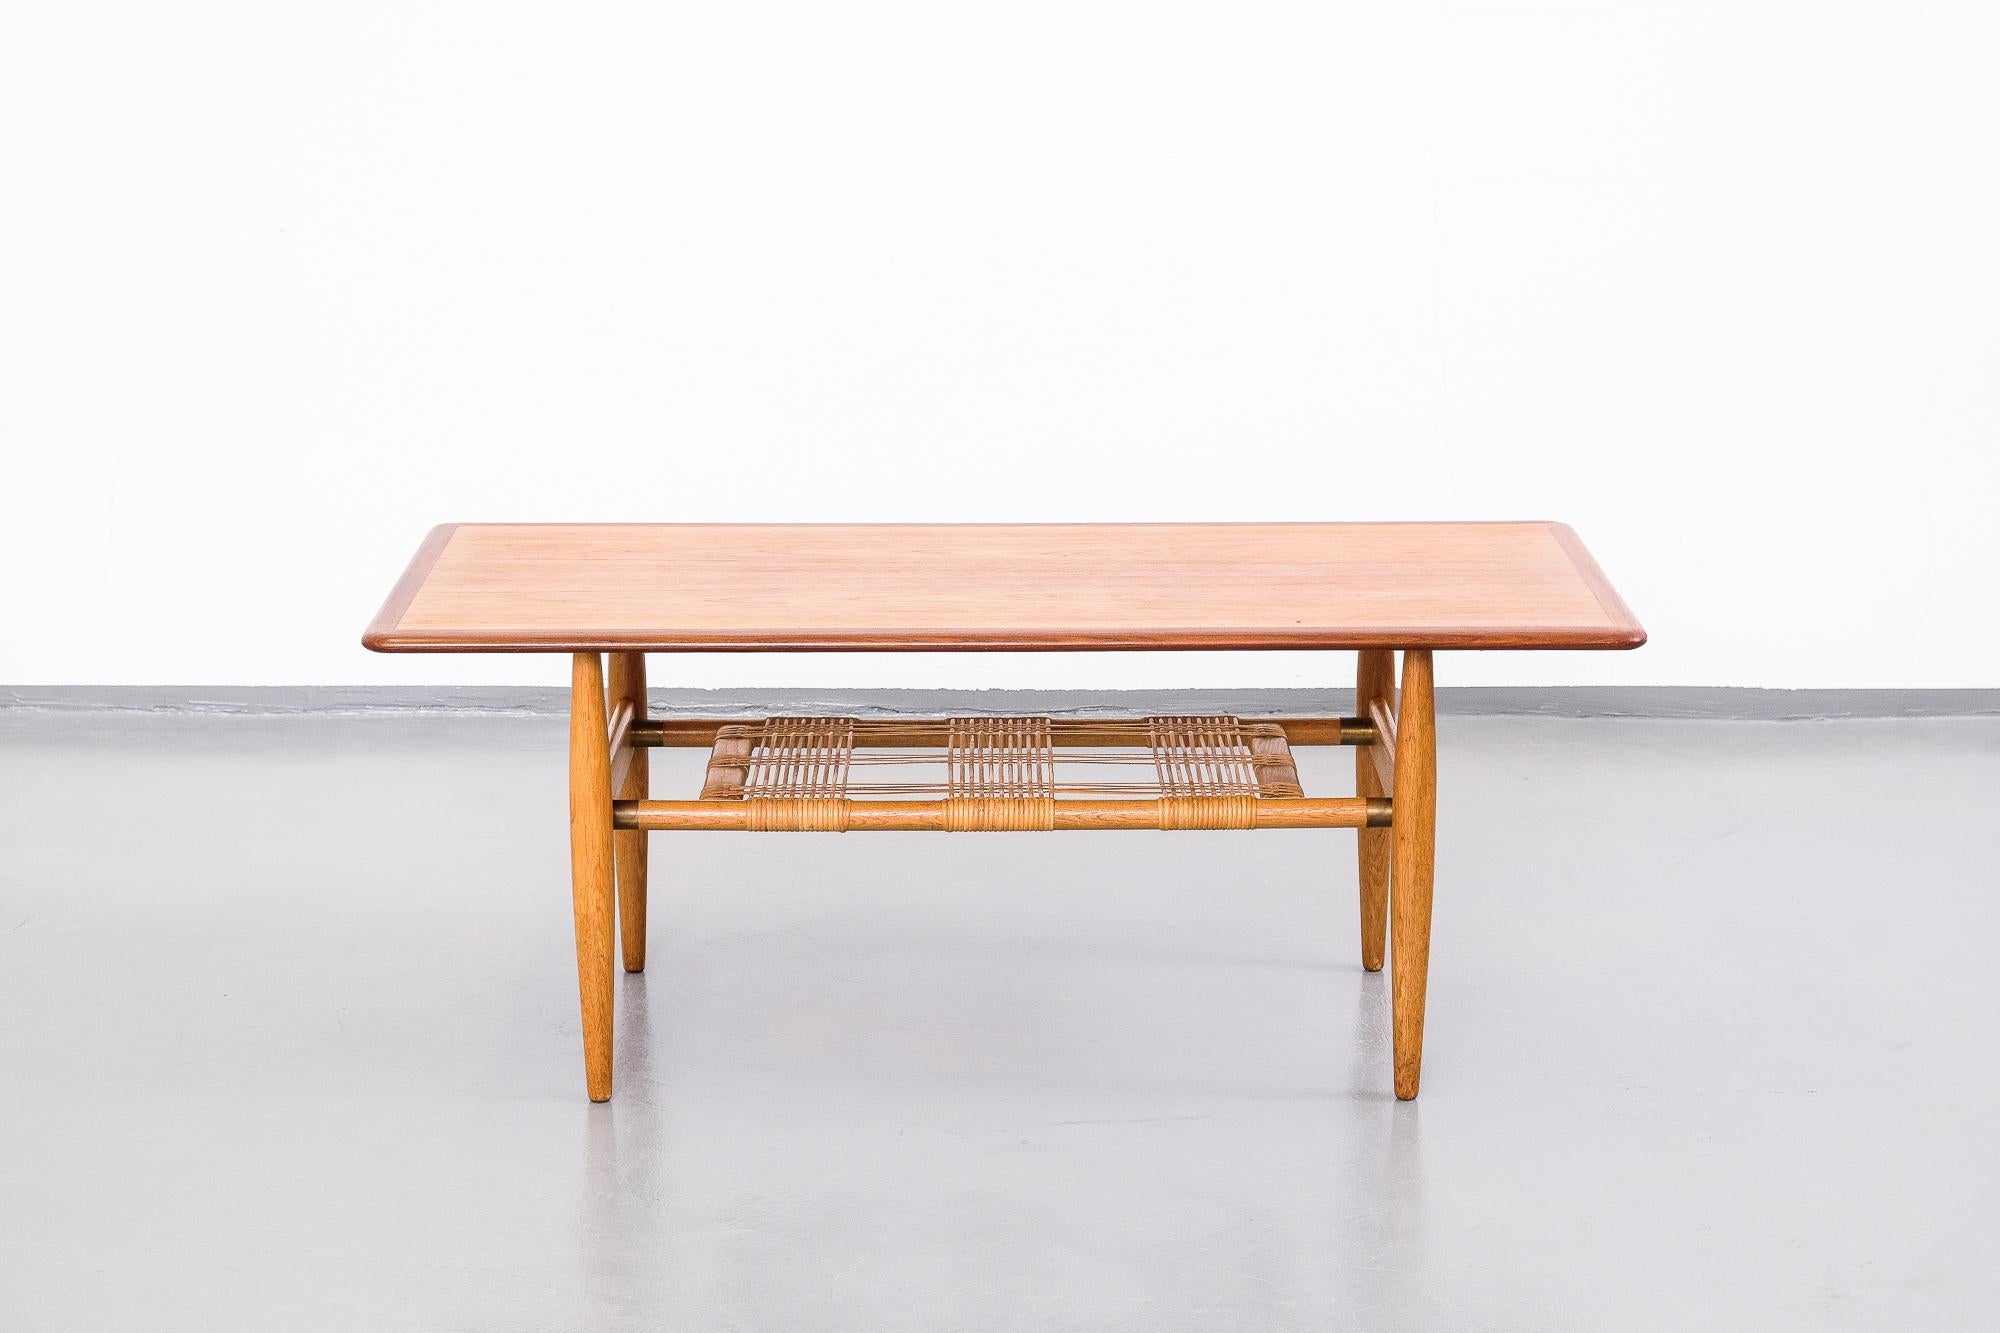 Great Scandinavian midcentury coffee table, probably Danish but unknown designer. Teak top, oak frame and woven cane shelf with brass details.